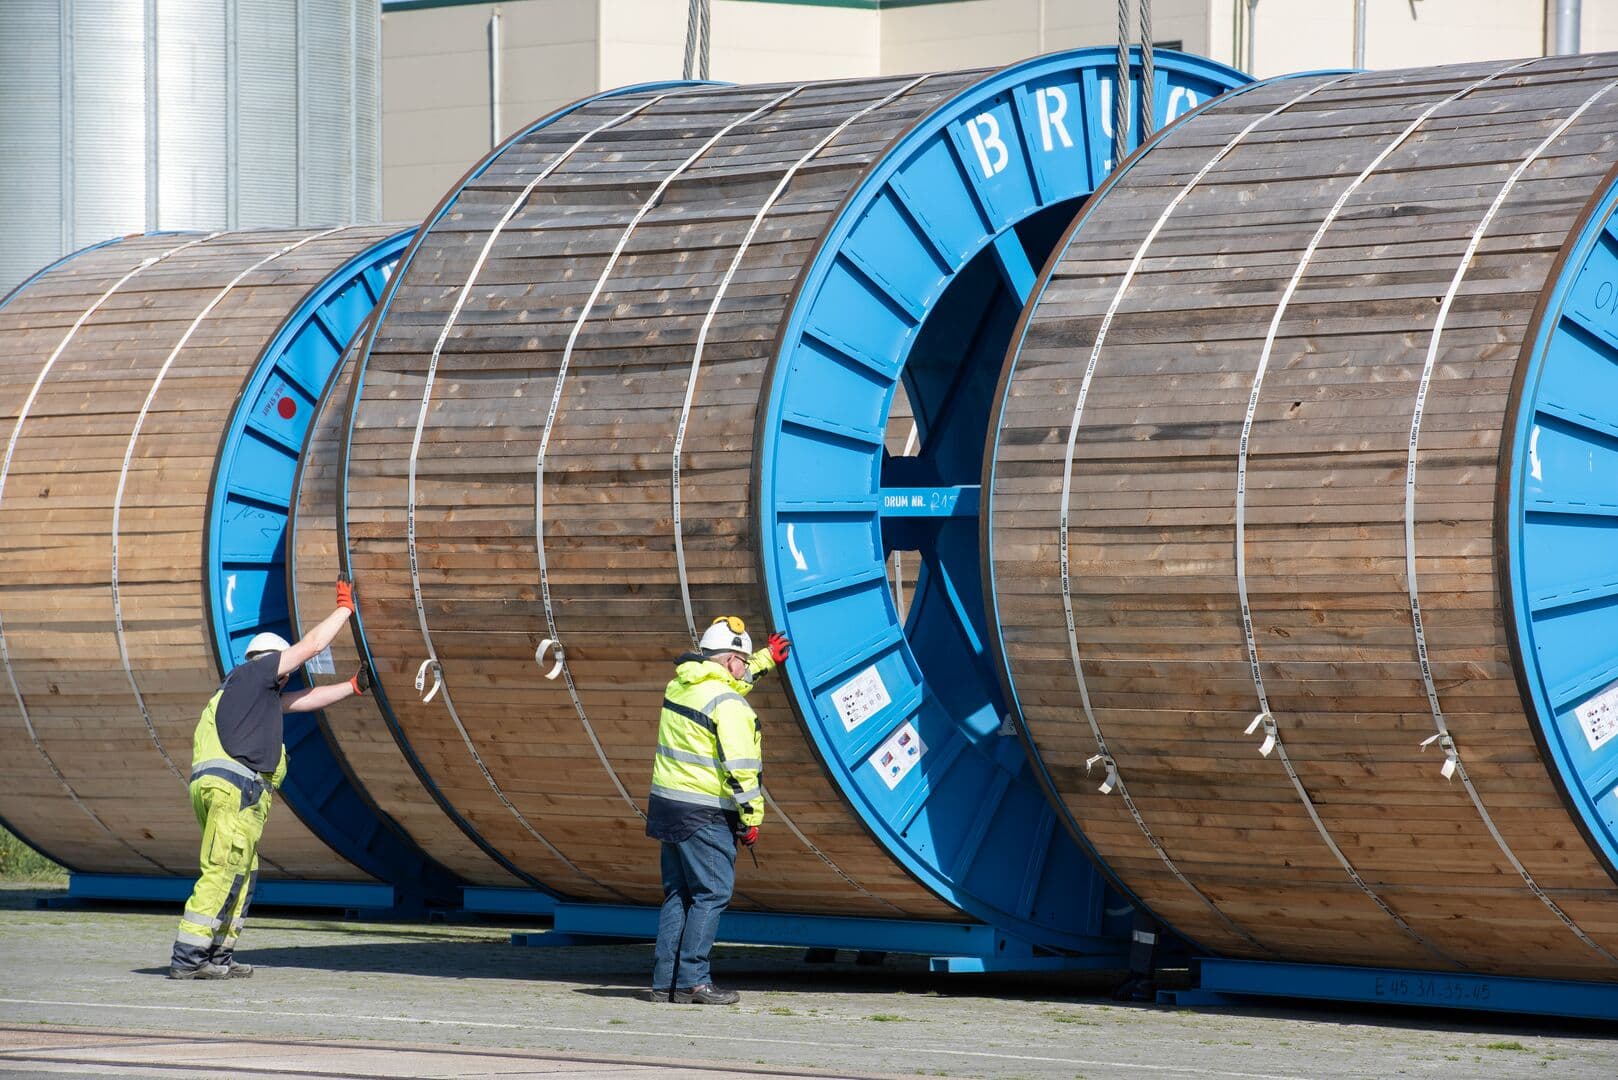 Colleagues at work, next to cable spools for the Hessen-Niedersachsen connection in Germany